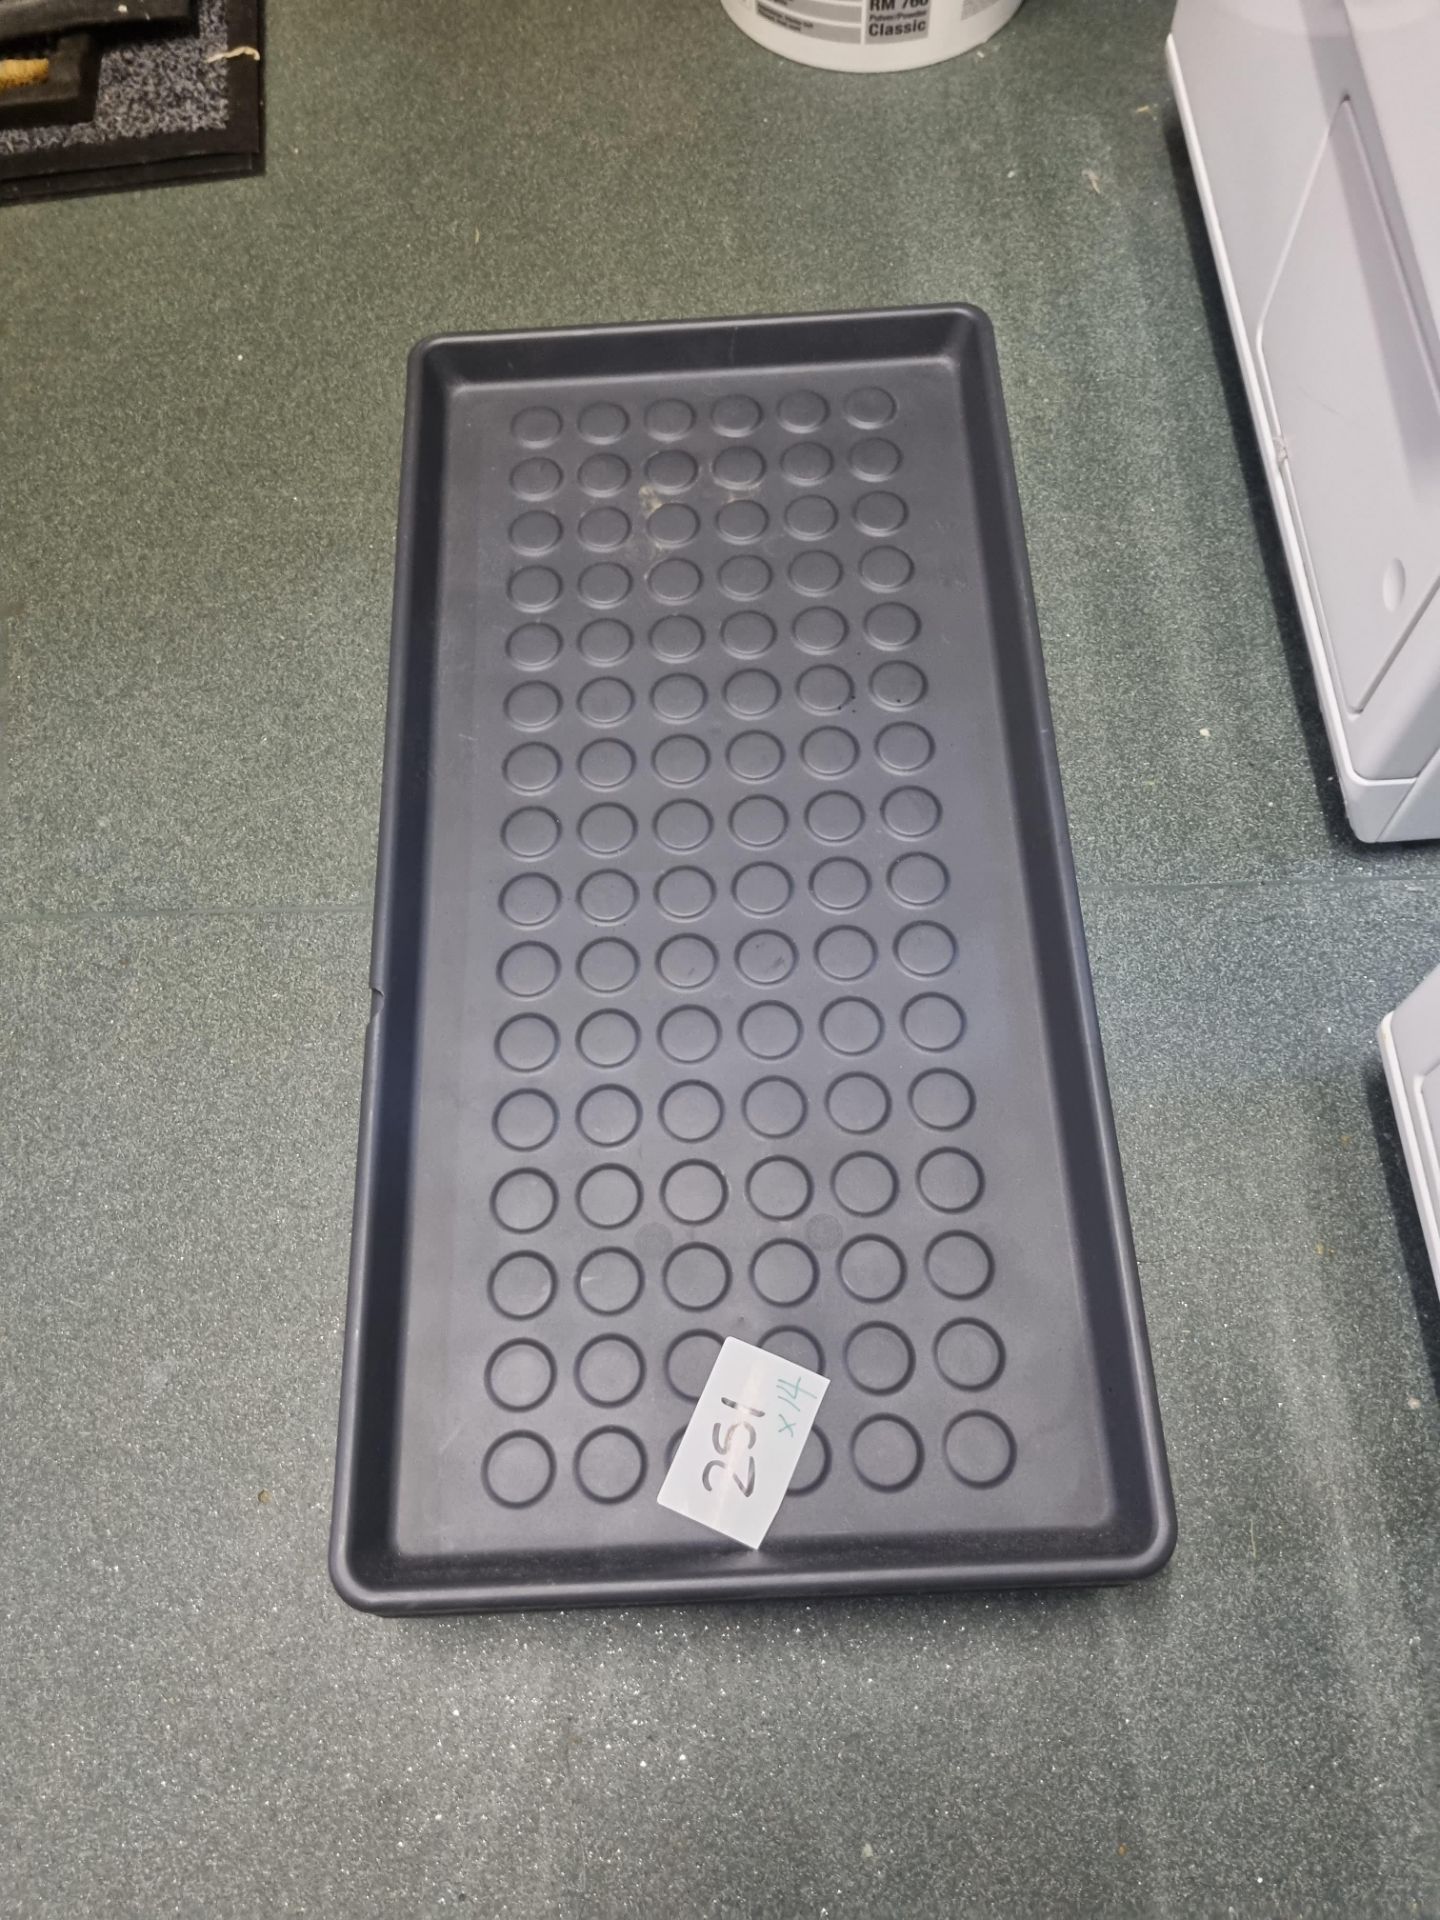 13 x Rubber Boot/Shoe Trays - Image 2 of 2